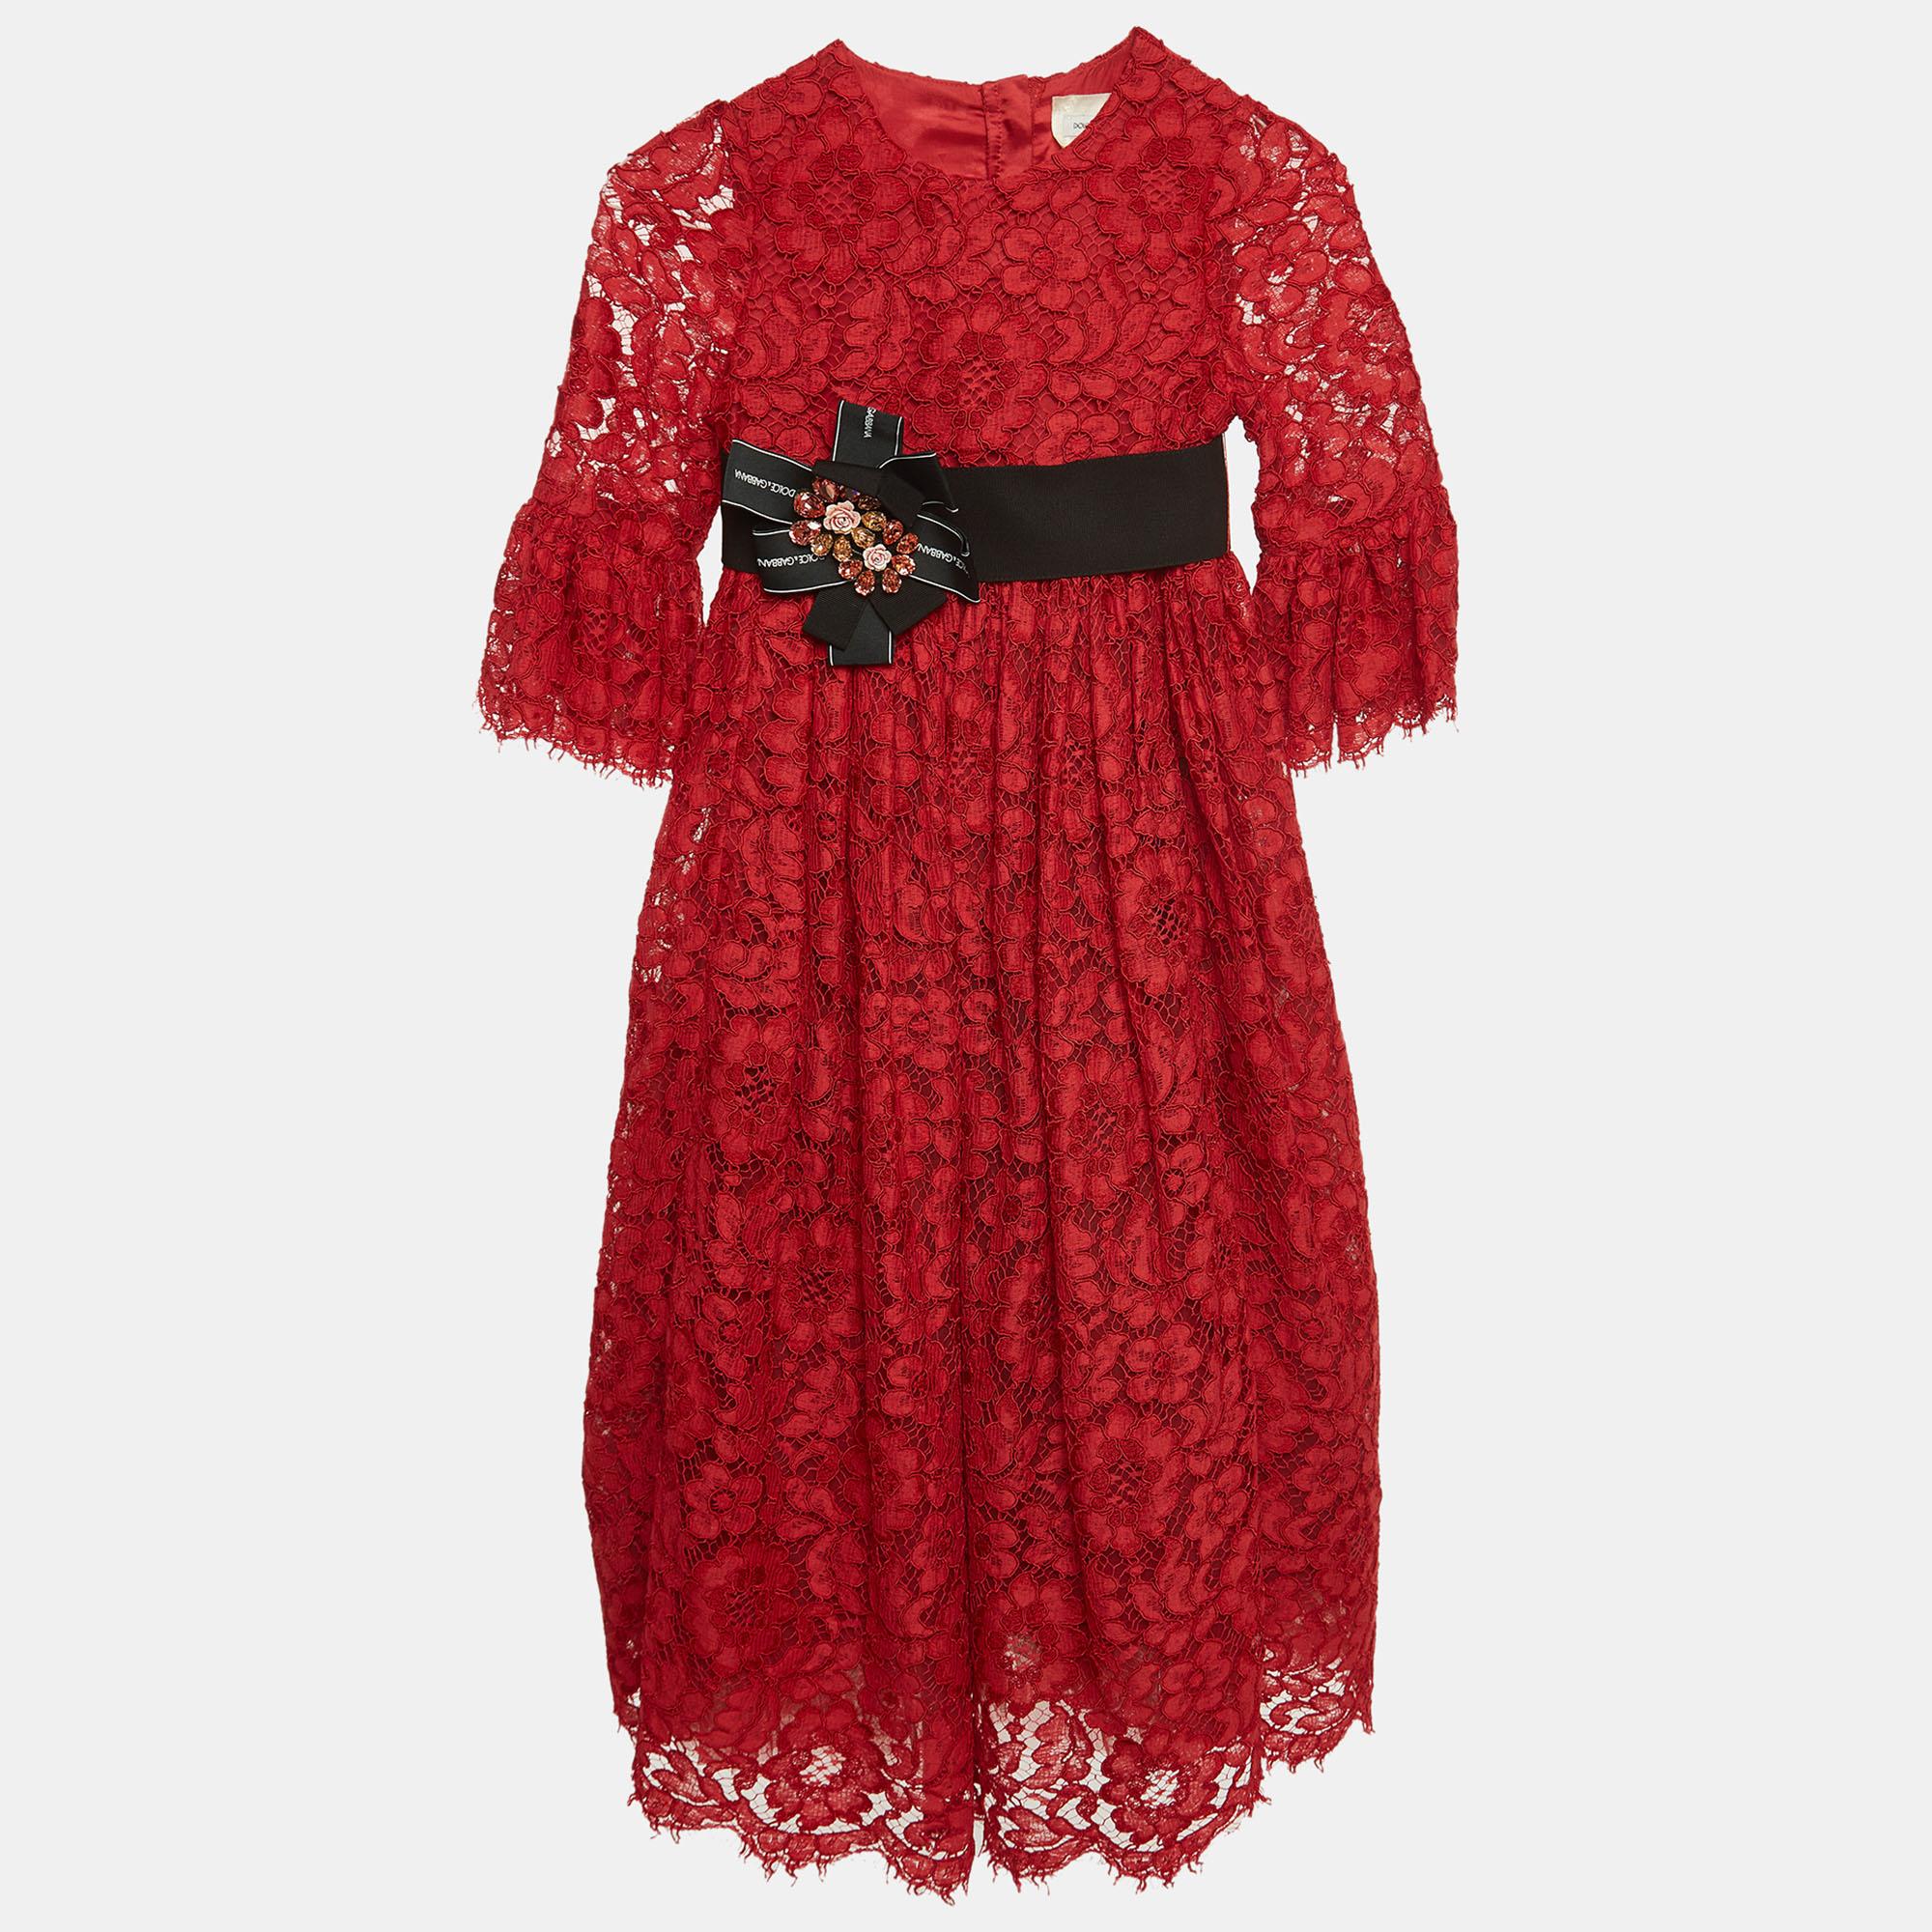 Elevate your little one's style with this Dolce & Gabbana limited edition red dress. Meticulously crafted for durability and comfort, it has a pretty lace design that's perfect for all seasons. Can be easily styled with ballet flats as well as